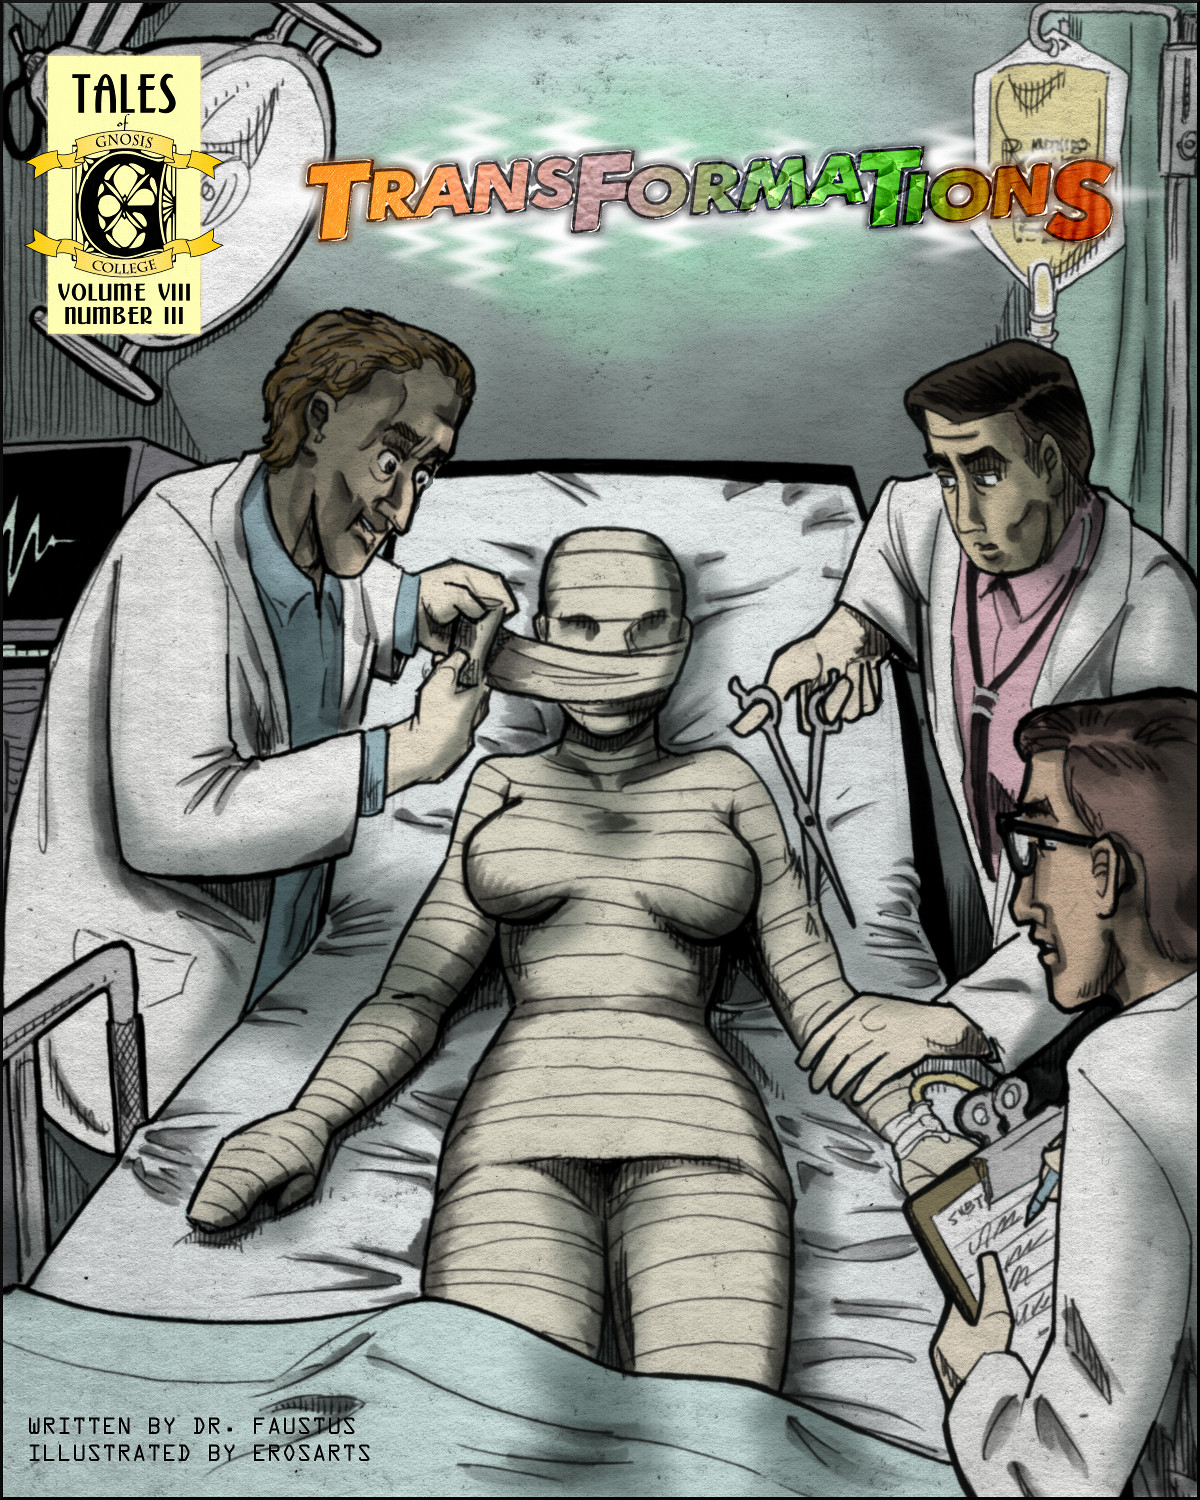 A shapely girl is transformed by mad science, but into what?